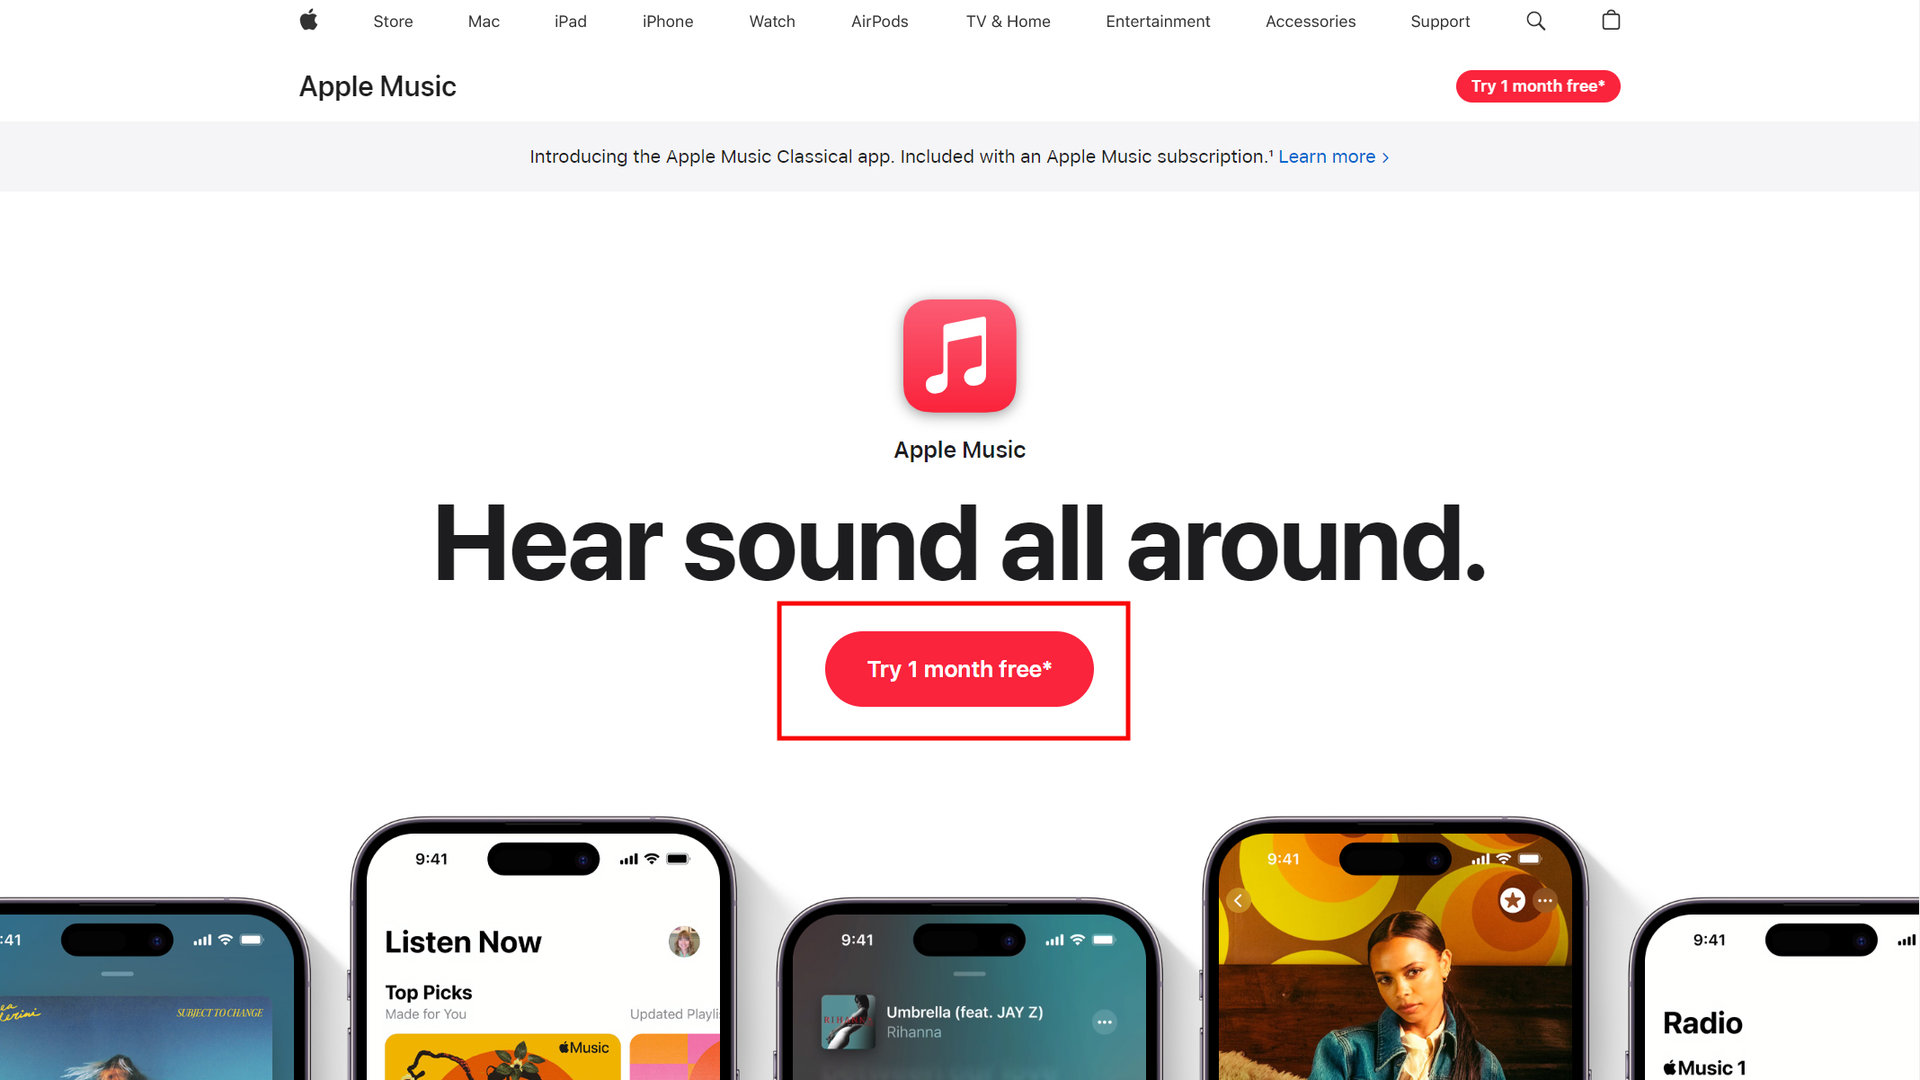 Sign up for an Apple Music free trial 1